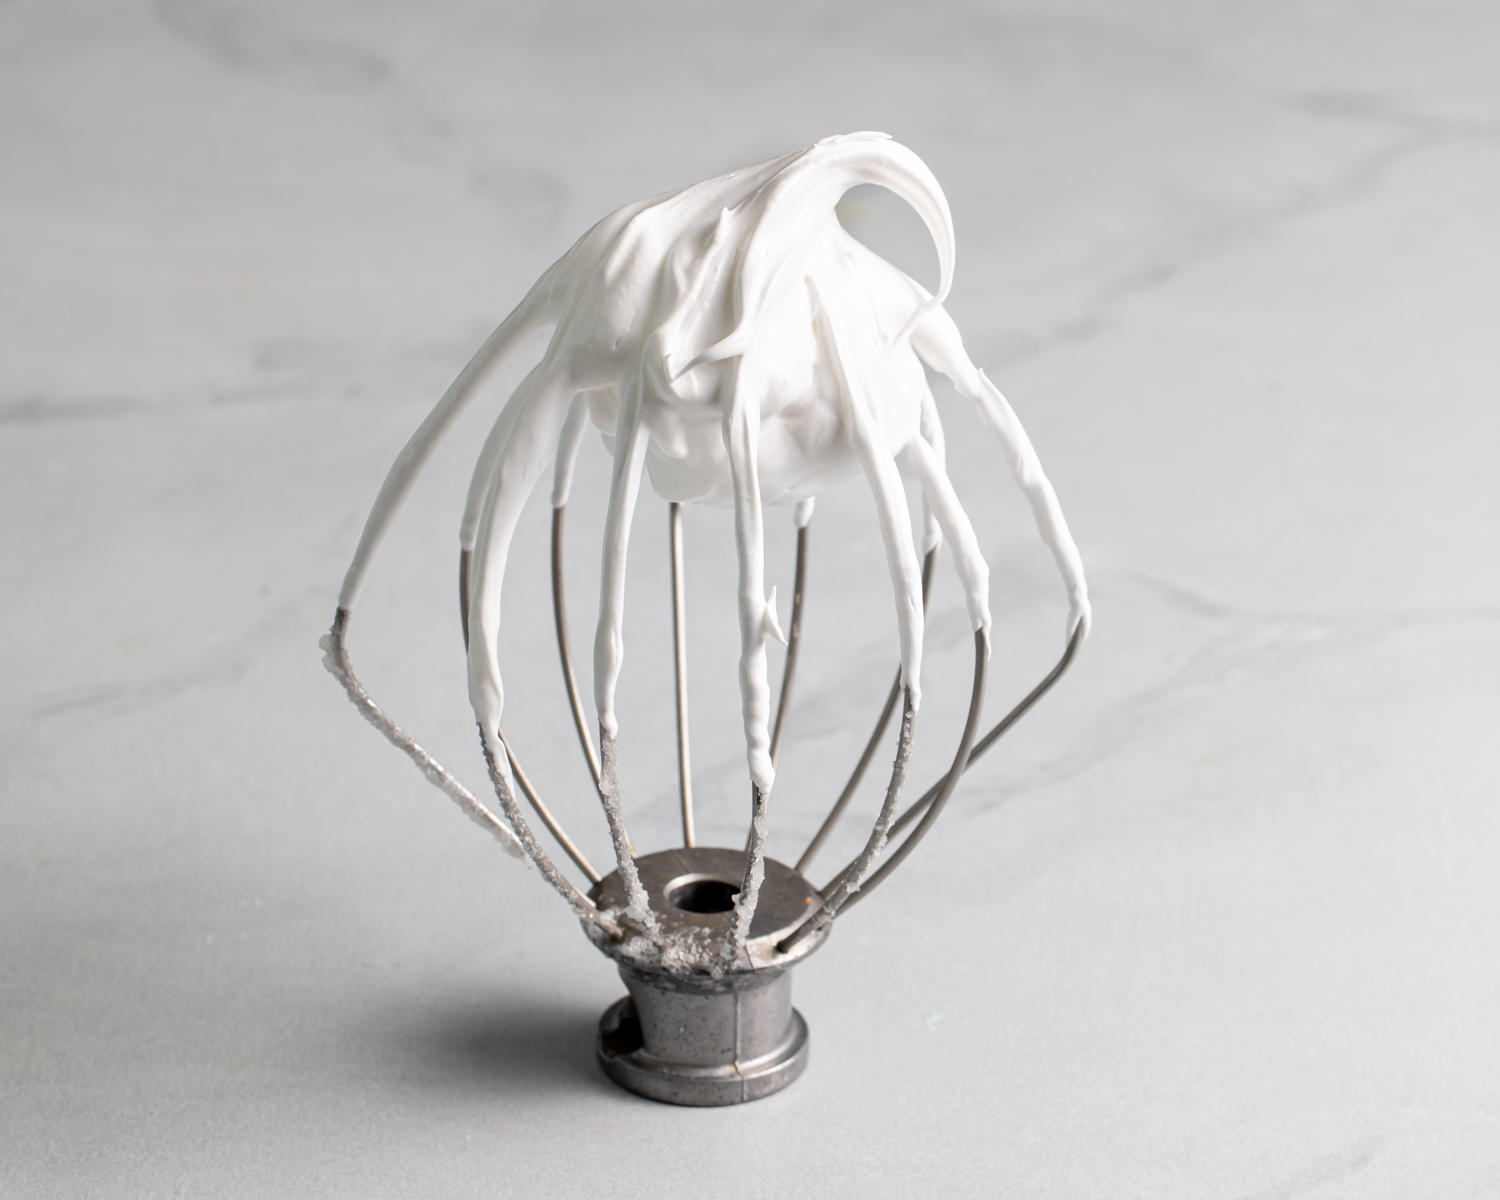 A whisk with soft peaks meringue